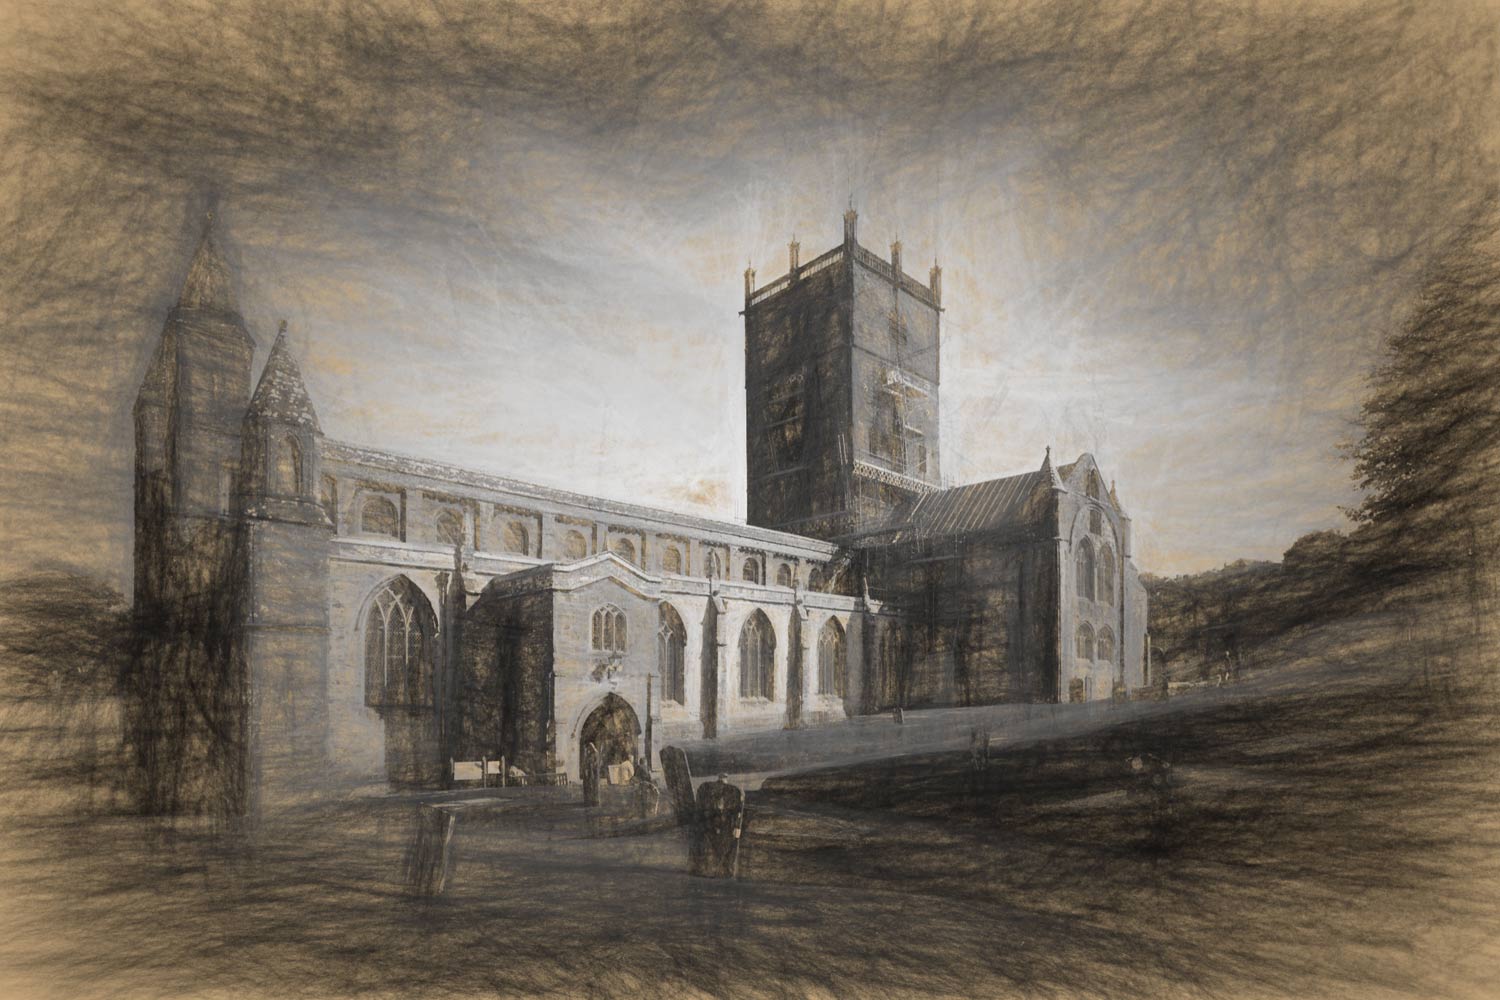 Sketch view of St Davids Cathedral in Pembrokeshire